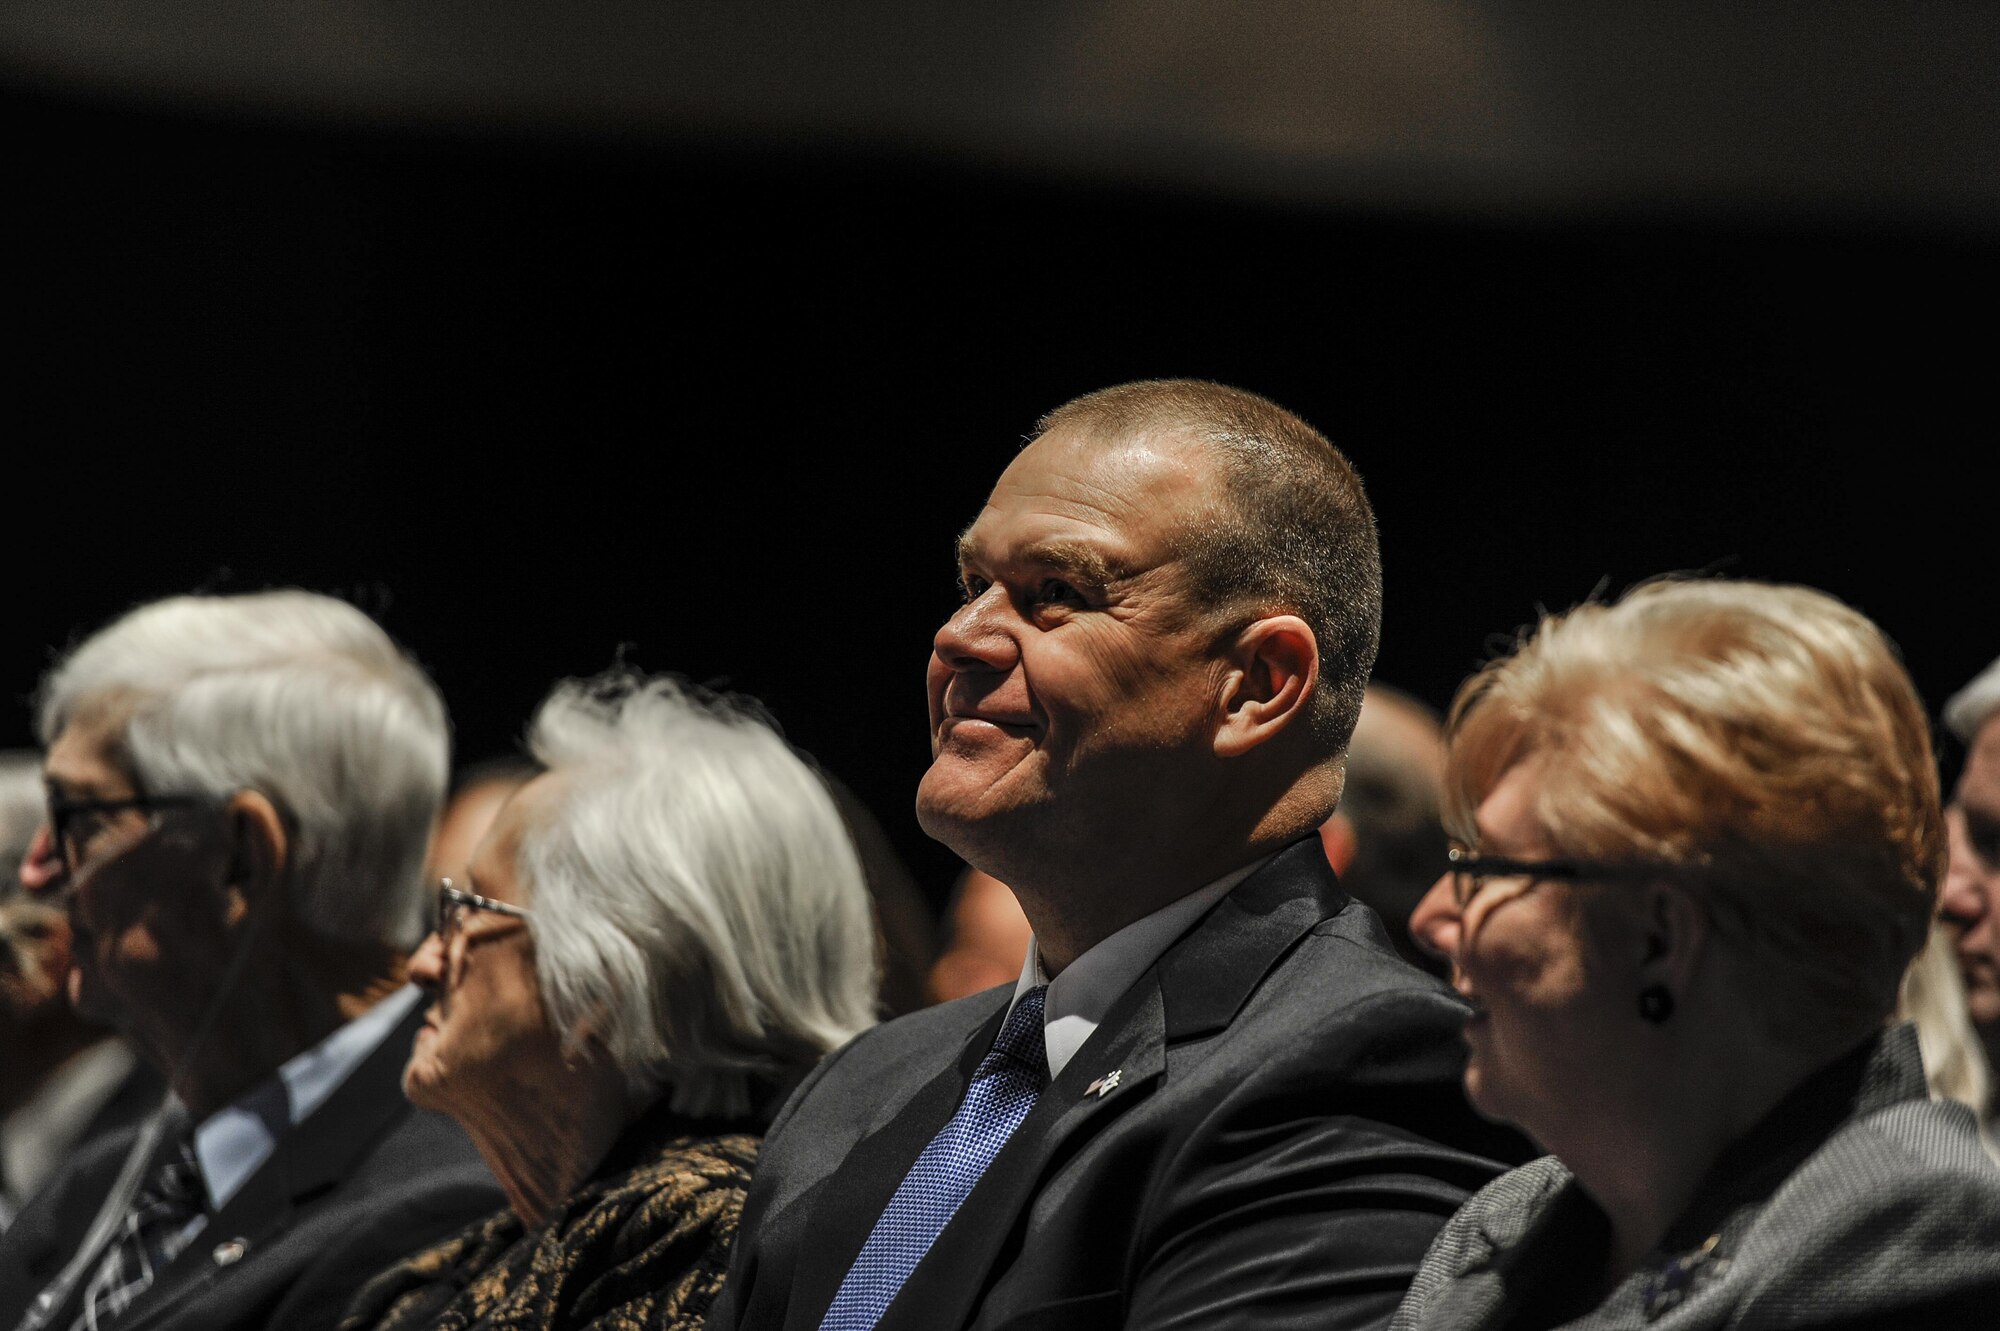 Chief Master Sgt. of the Air Force #16, James Roy, smiles during a celebration of life ceremony for Chief Master Sgt. Of the Air Force #9, James C. Binnicker, at the Emerald Coast Convention Center, Fort Walton Beach, Fla., March 28, 2015. More than 1,000 people attended Binnicker’s celebration of life ceremony. He died March 21 in Calhoun, Ga. He was 76 years old. A memorial service and interment will be at Arlington National Cemetery, Virginia, at a later date. (U.S. Air Force photo/Senior Airman Christopher Callaway)